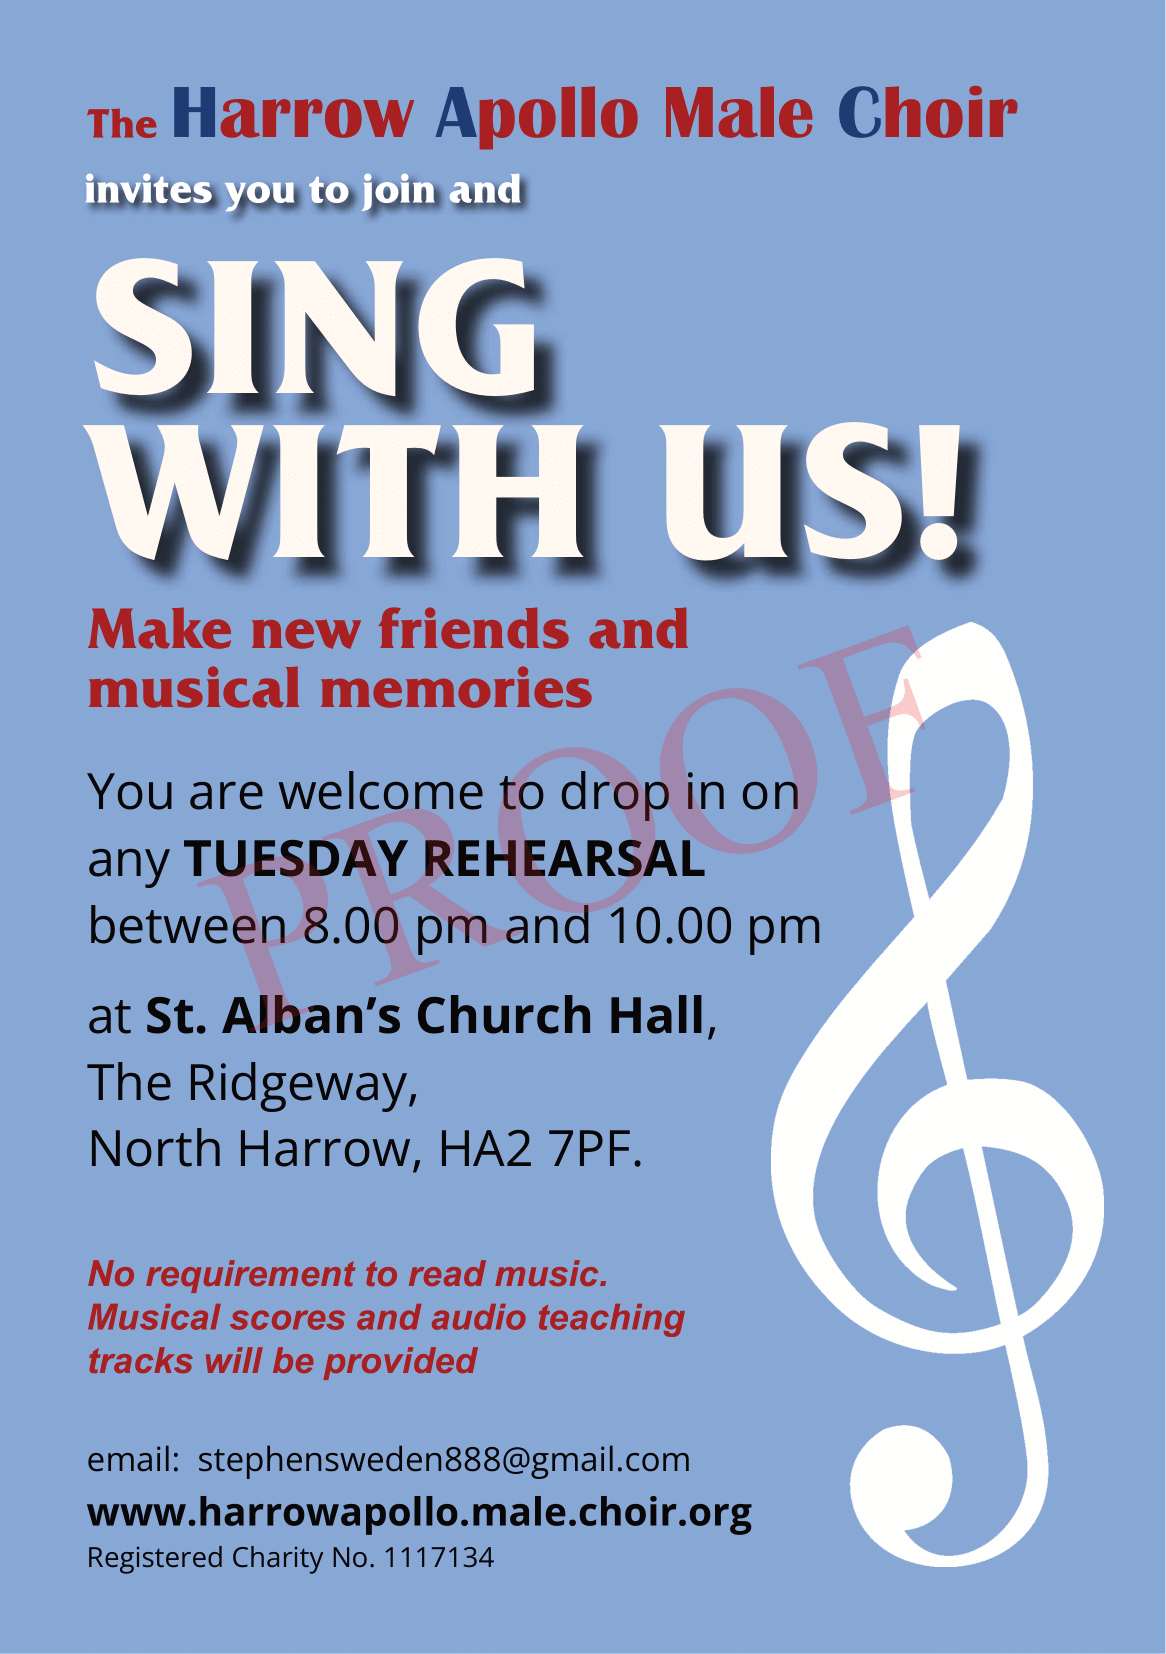 Autumn concert at St albans church sunday 29th 3pm. Box office email: michael@leighandco.co.uk